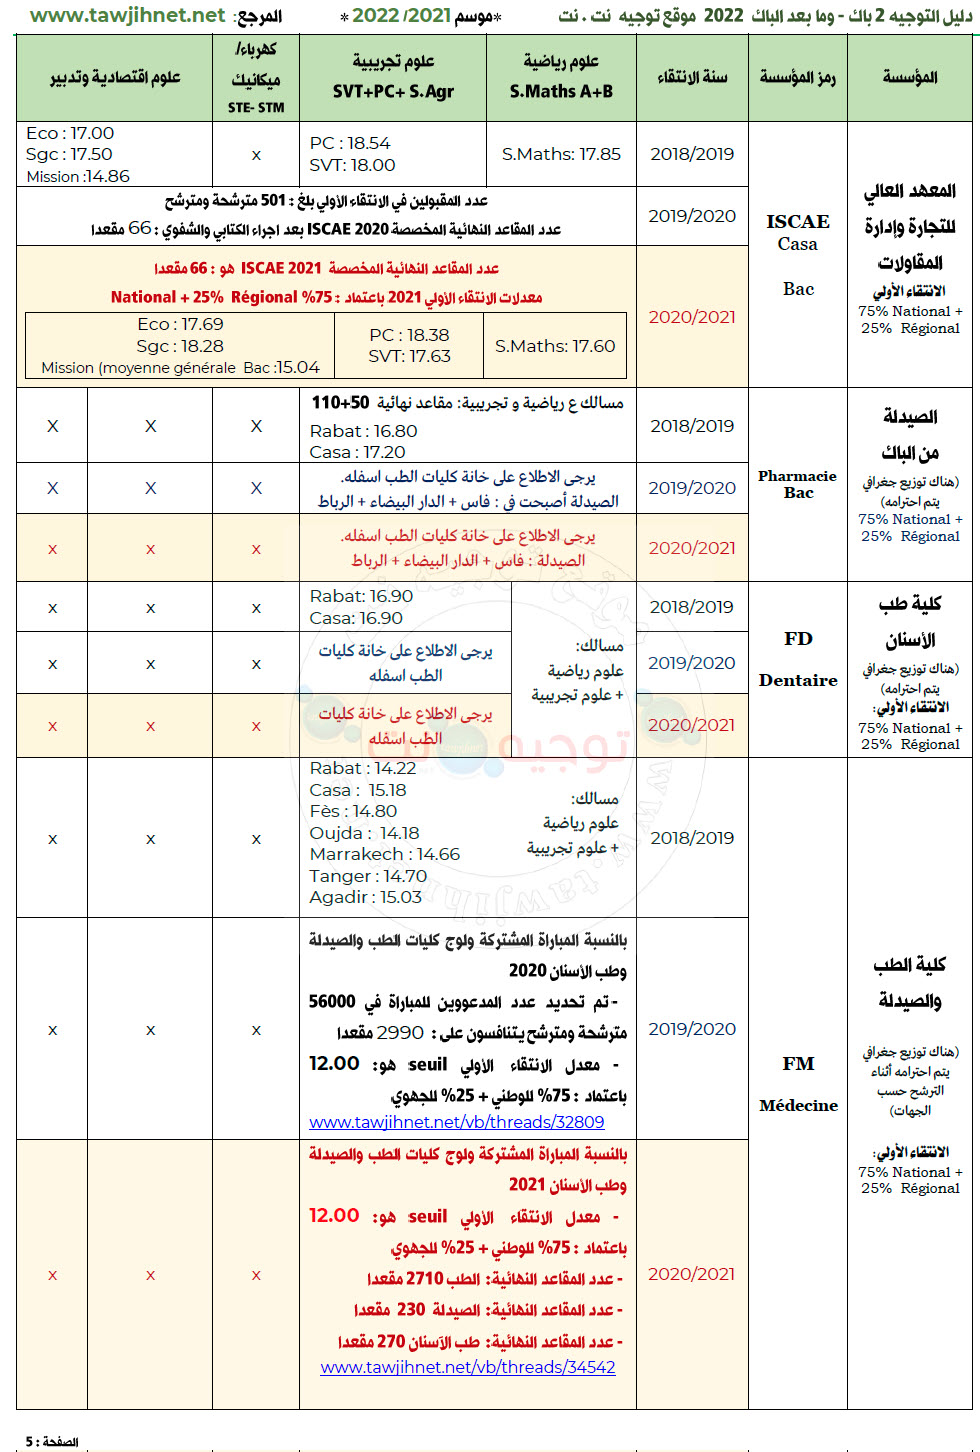 dalil tawjihnet Bac seuils preselection ecoles instituts maroc 2022_Page_2.jpg